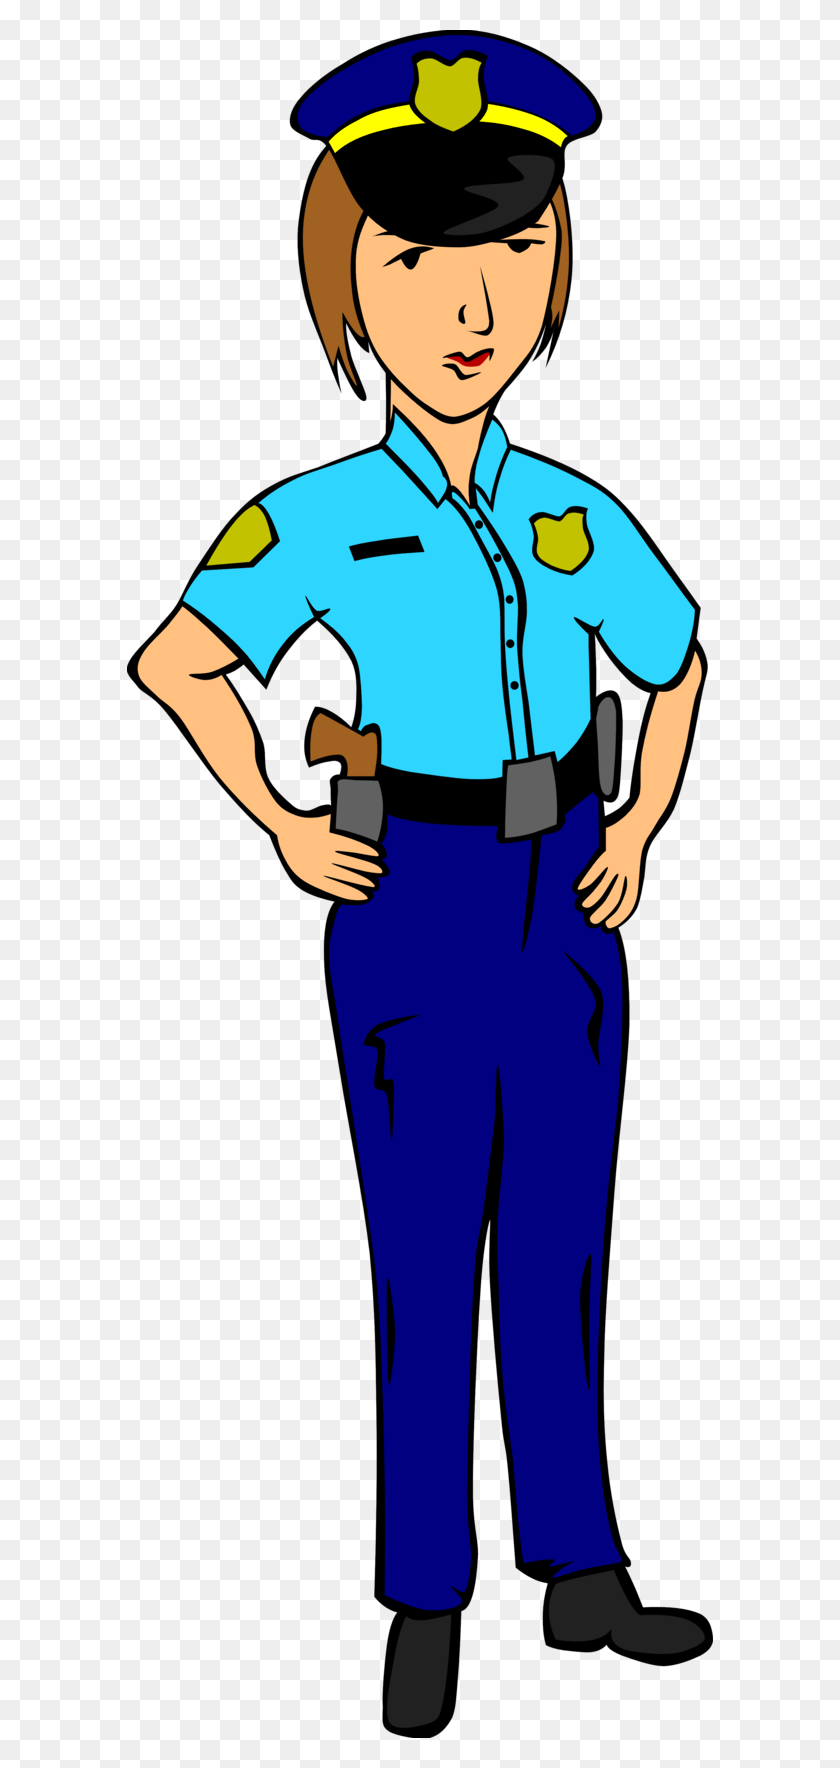 586x1708 Police Clip Art Free Clipart Images - Form Clipart